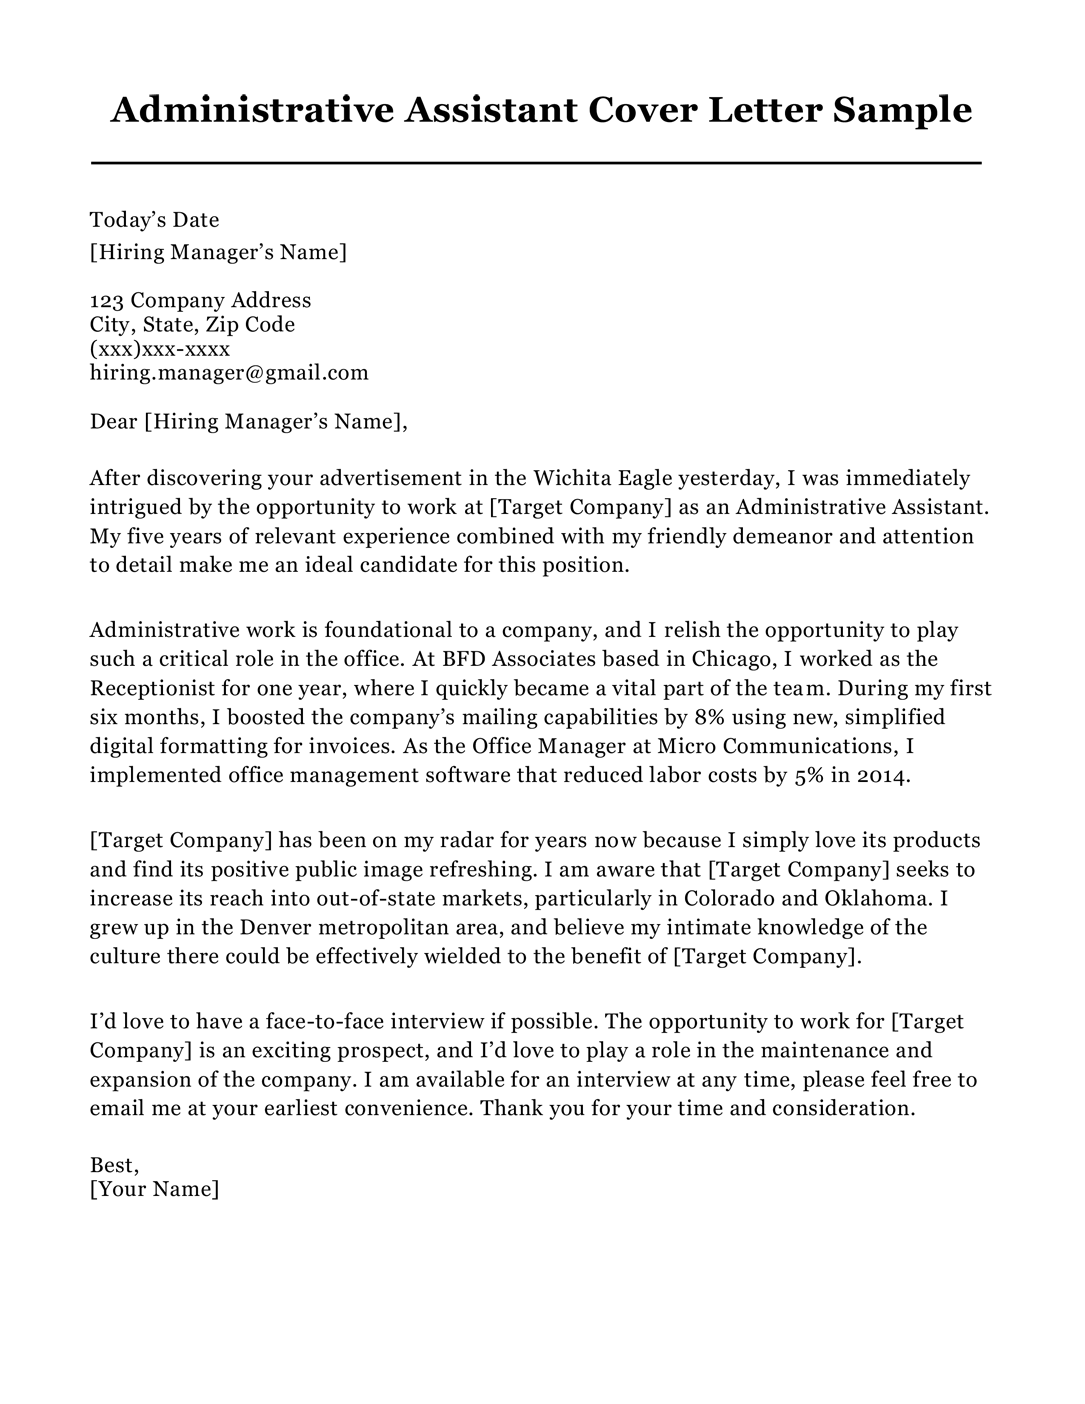 Sample Cover Letter For Administrative Assistant Position from resumecompanion.com